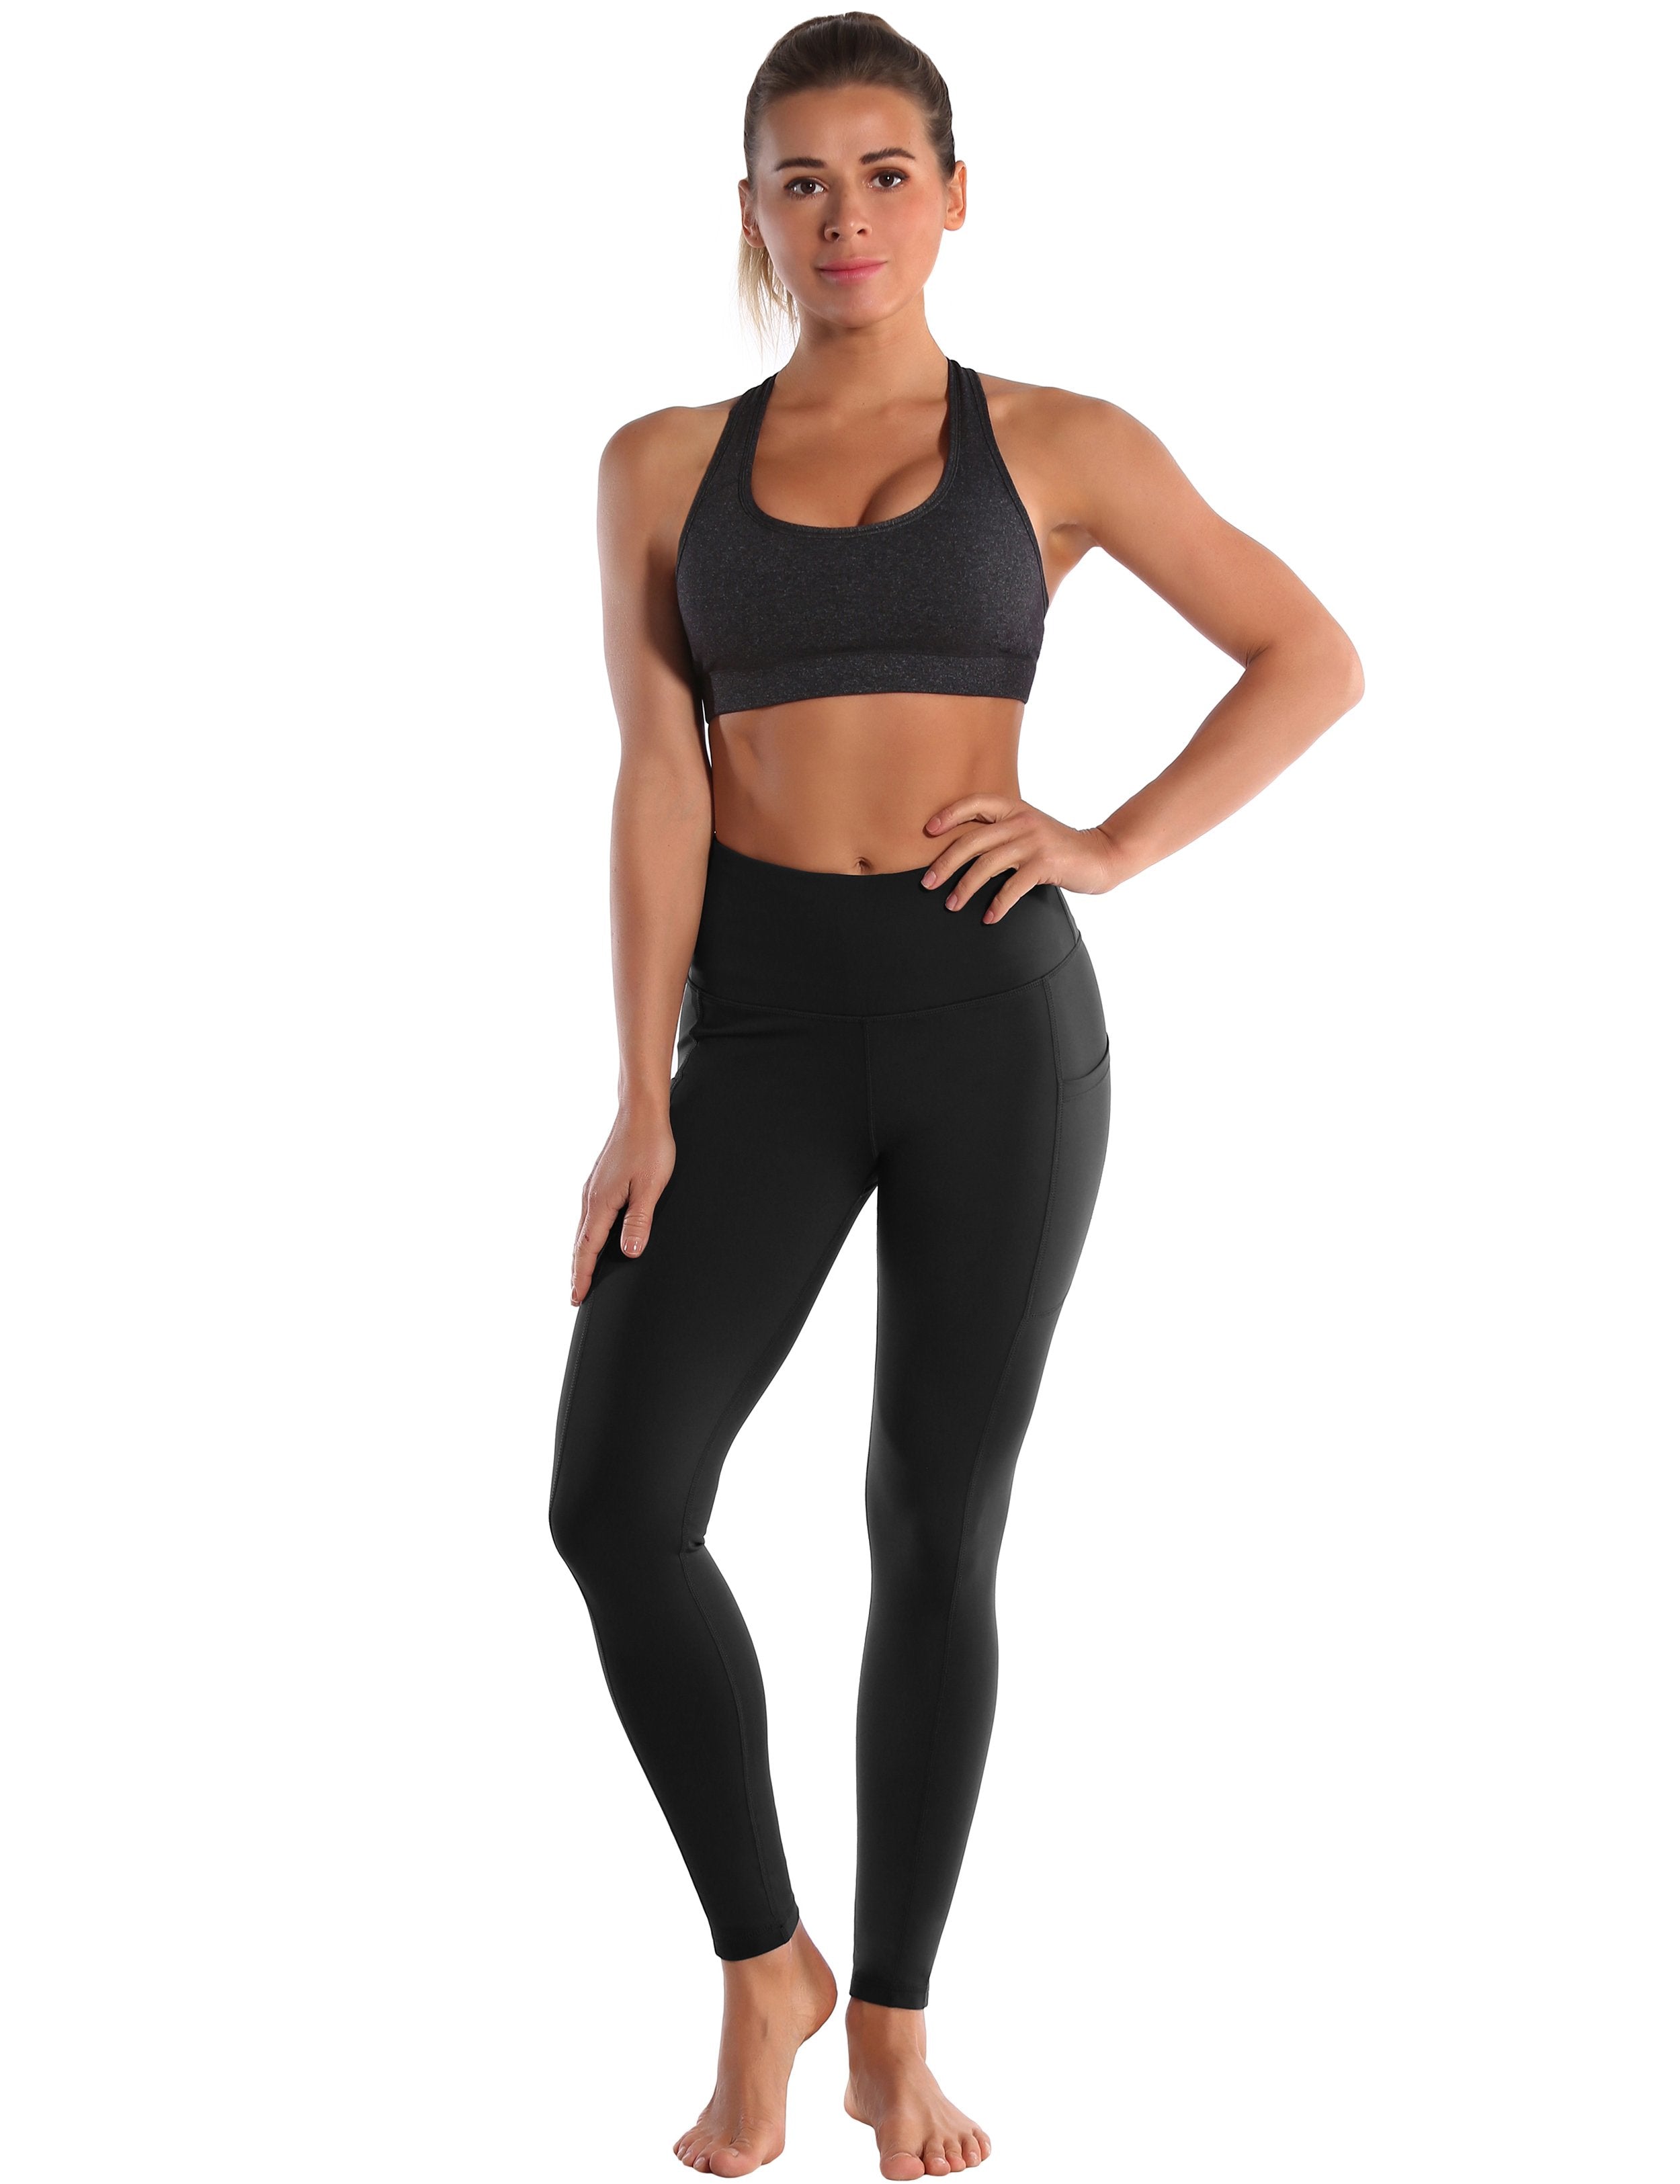 Hip Line Side Pockets Plus Size Pants black Sexy Hip Line Side Pockets 75%Nylon/25%Spandex Fabric doesn't attract lint easily 4-way stretch No see-through Moisture-wicking Tummy control Inner pocket Two lengths